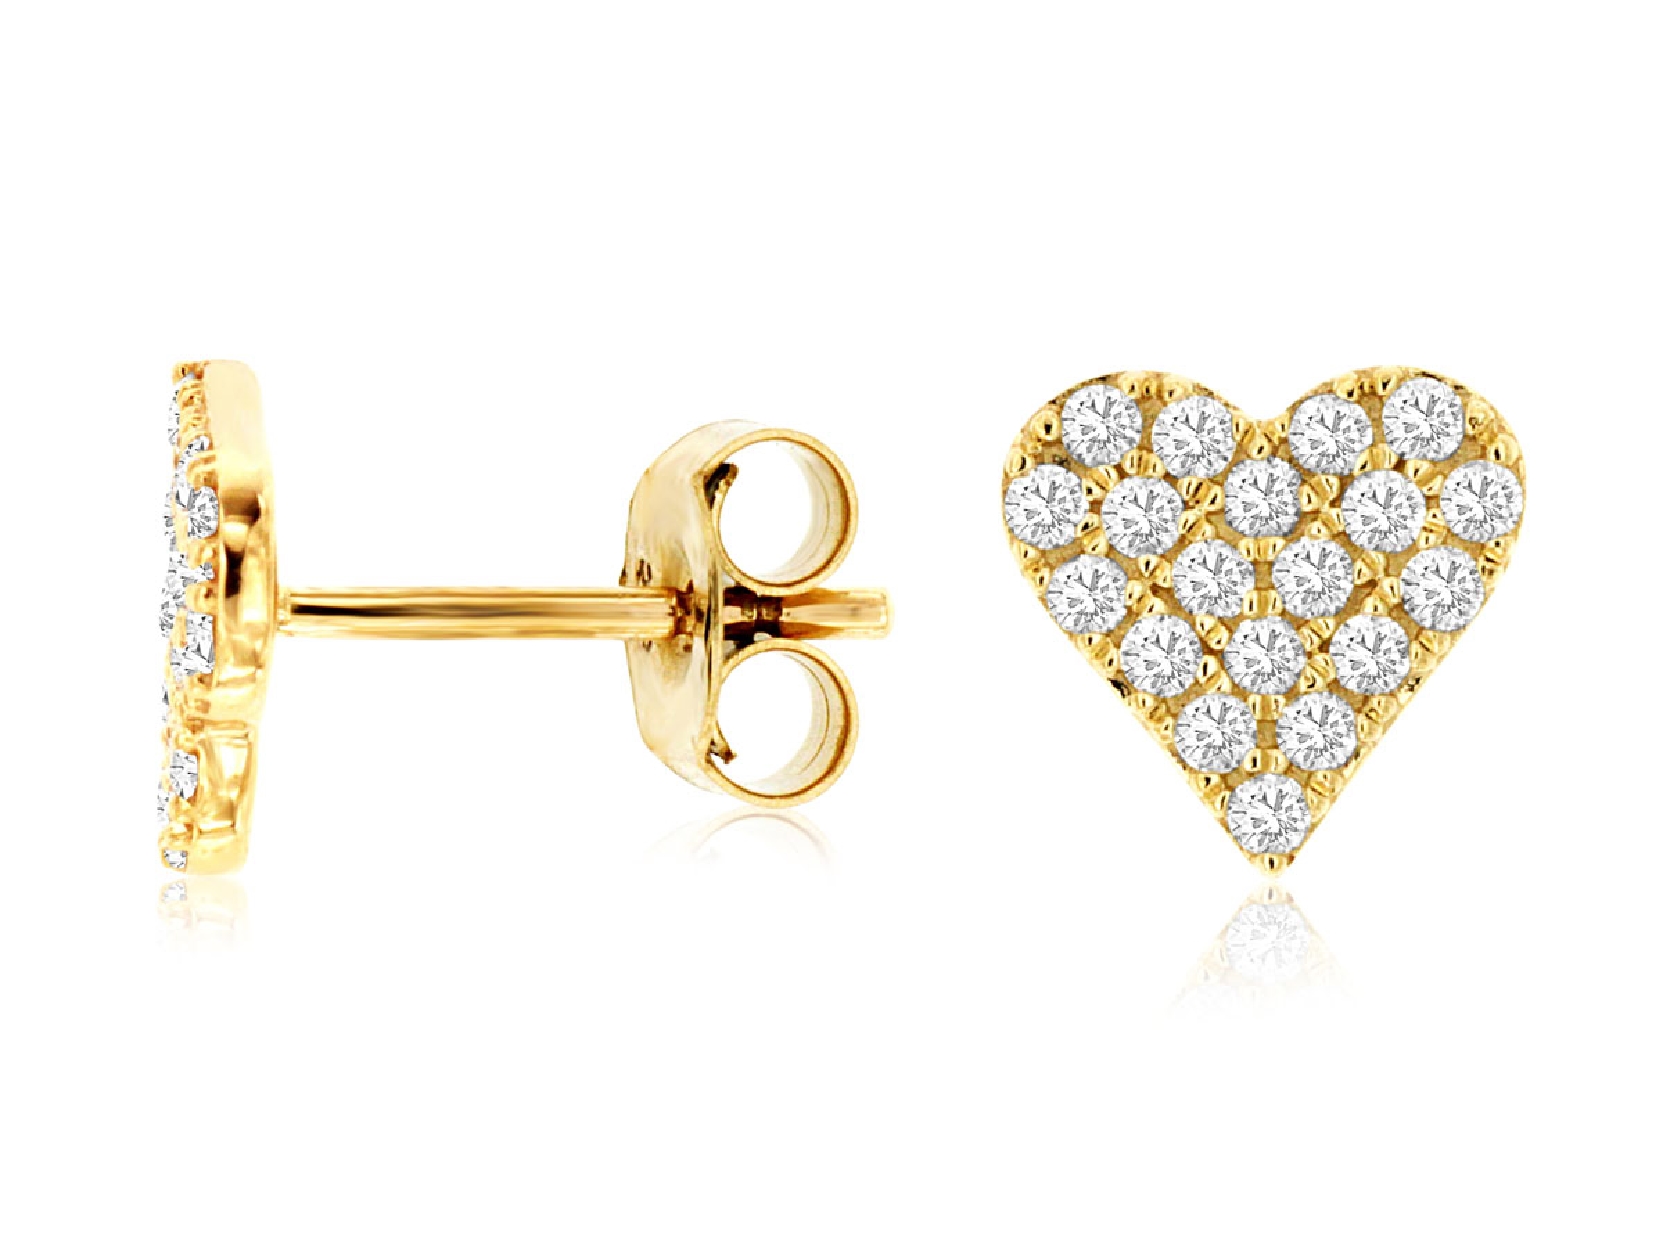 14K Yellow Gold Diamond Pave Heart Stud Earrings with Friction Backs

0.38cttw Diamonds 